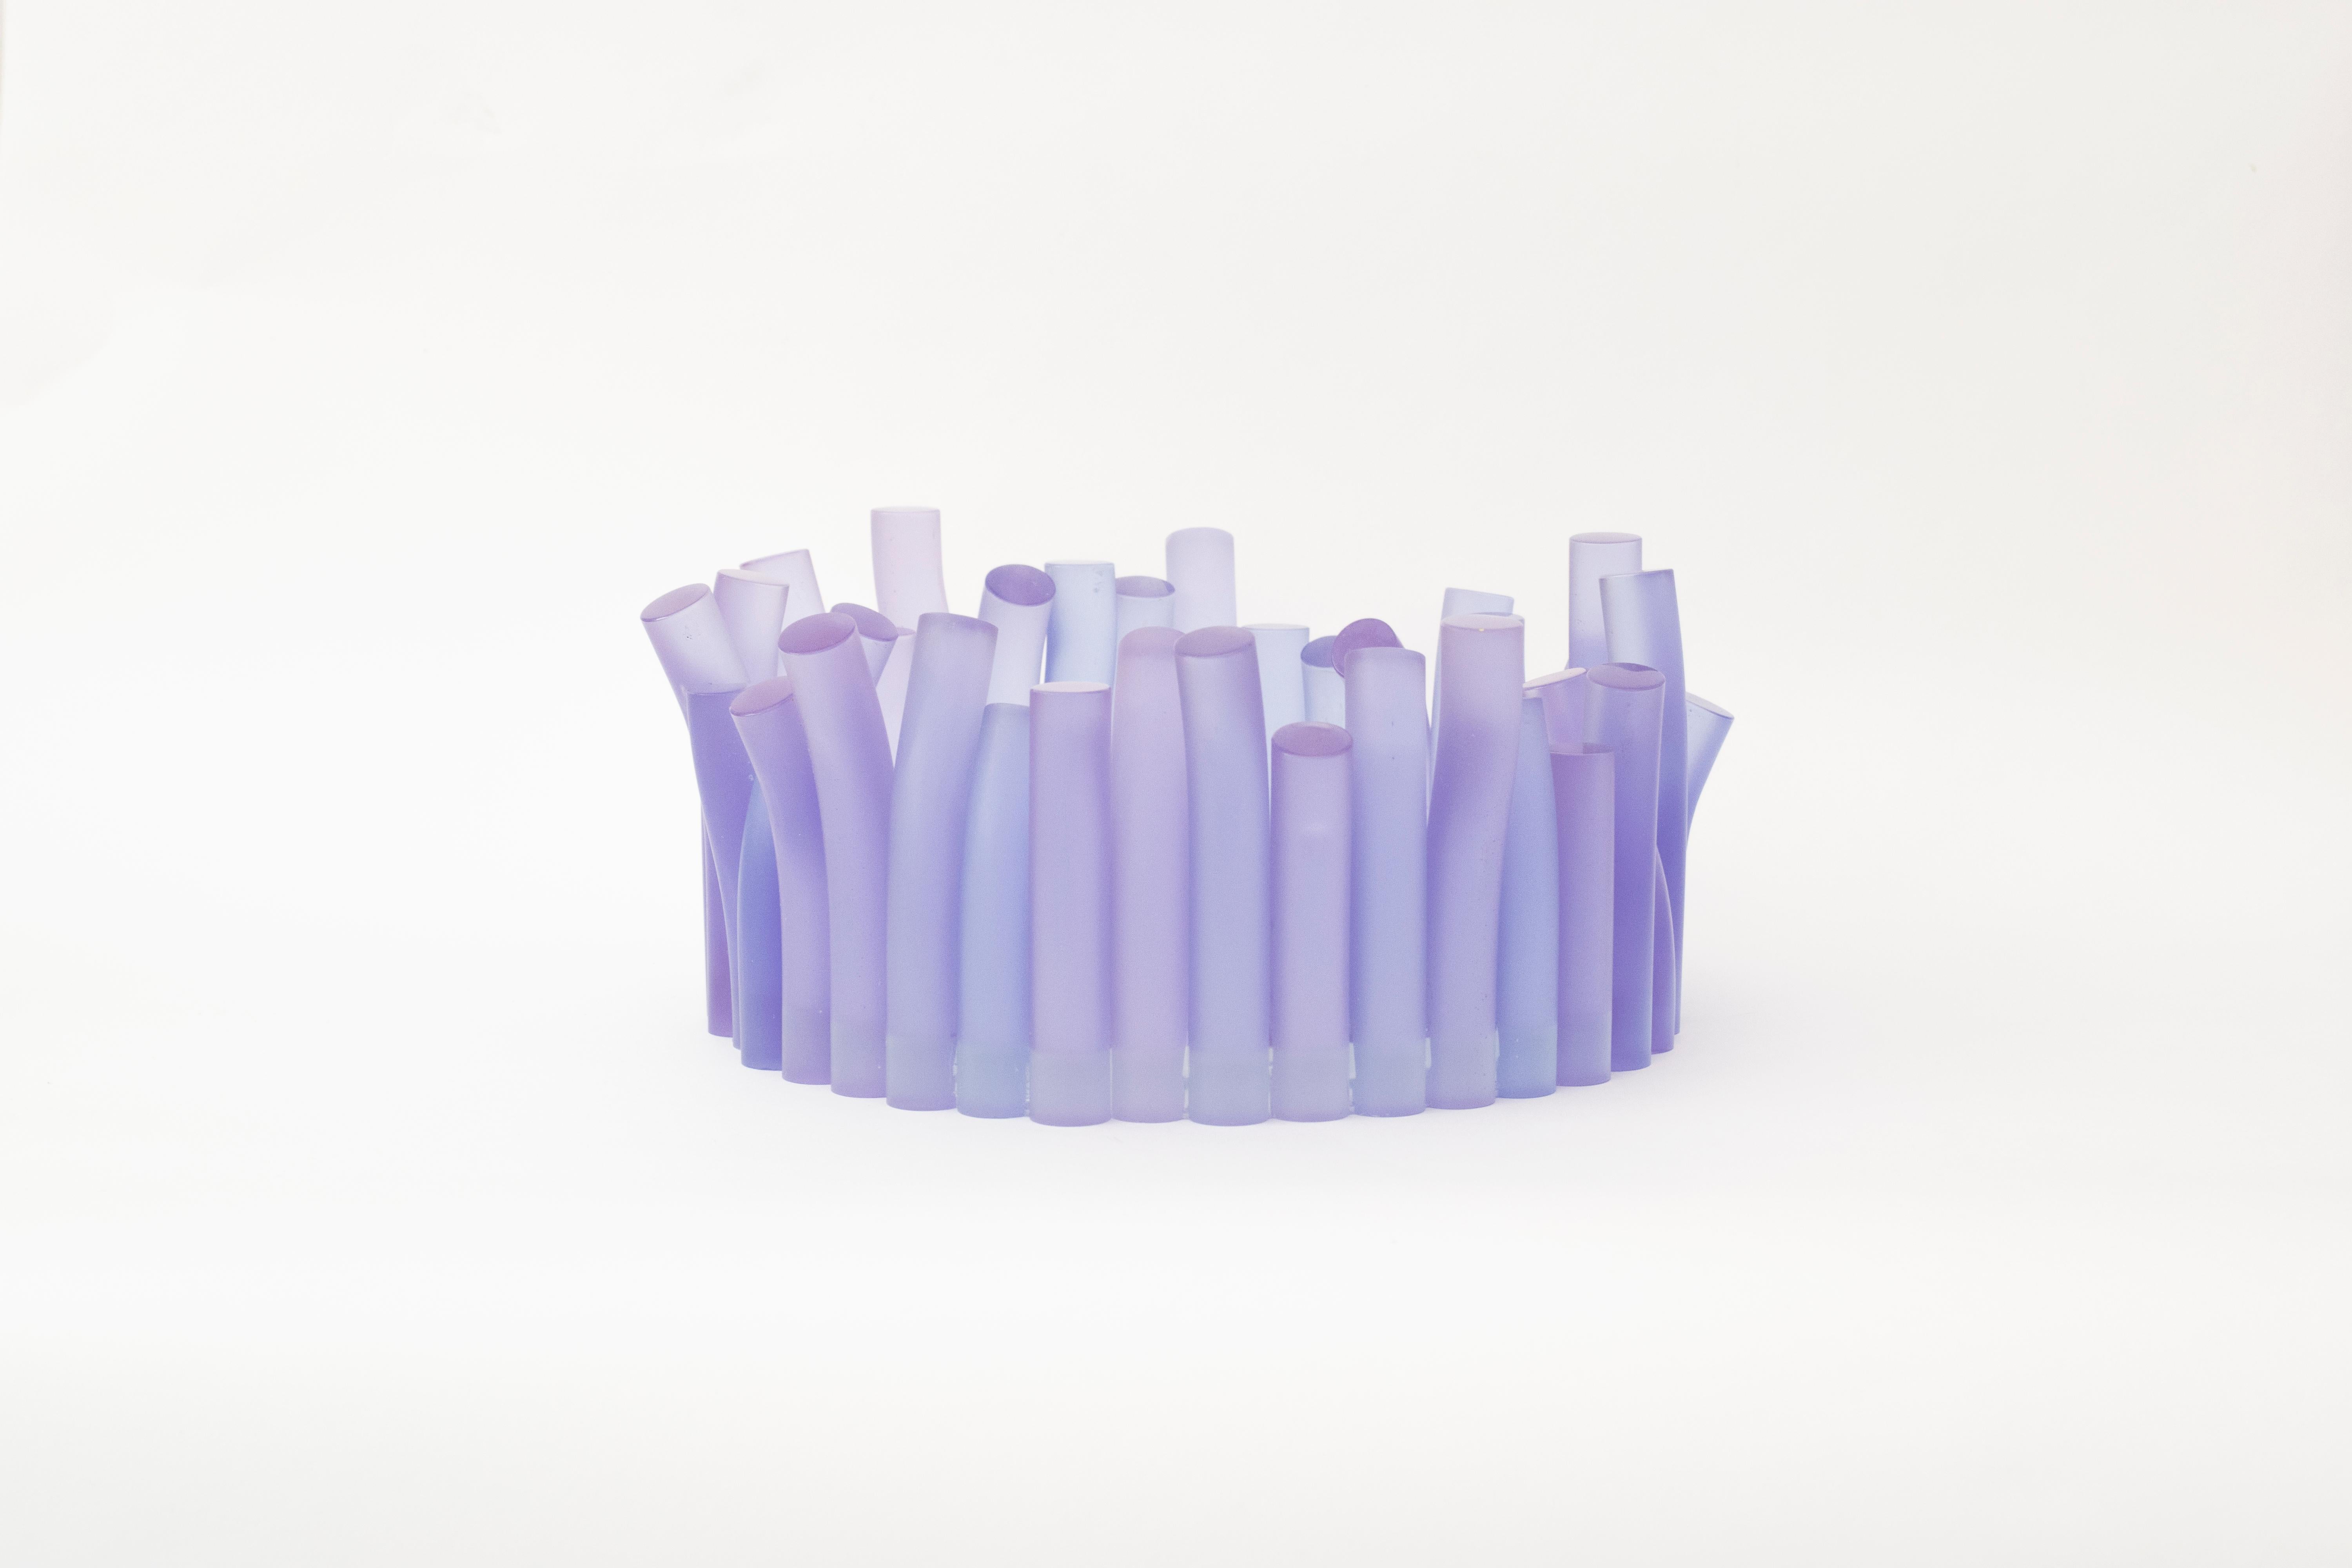 The table centerpiece is entirely handcrafted in transparent resin, dyed and casted into solid rod. Each rod is individually polished and shape to give the bowl its organic complexion. Other colors are available on demand.